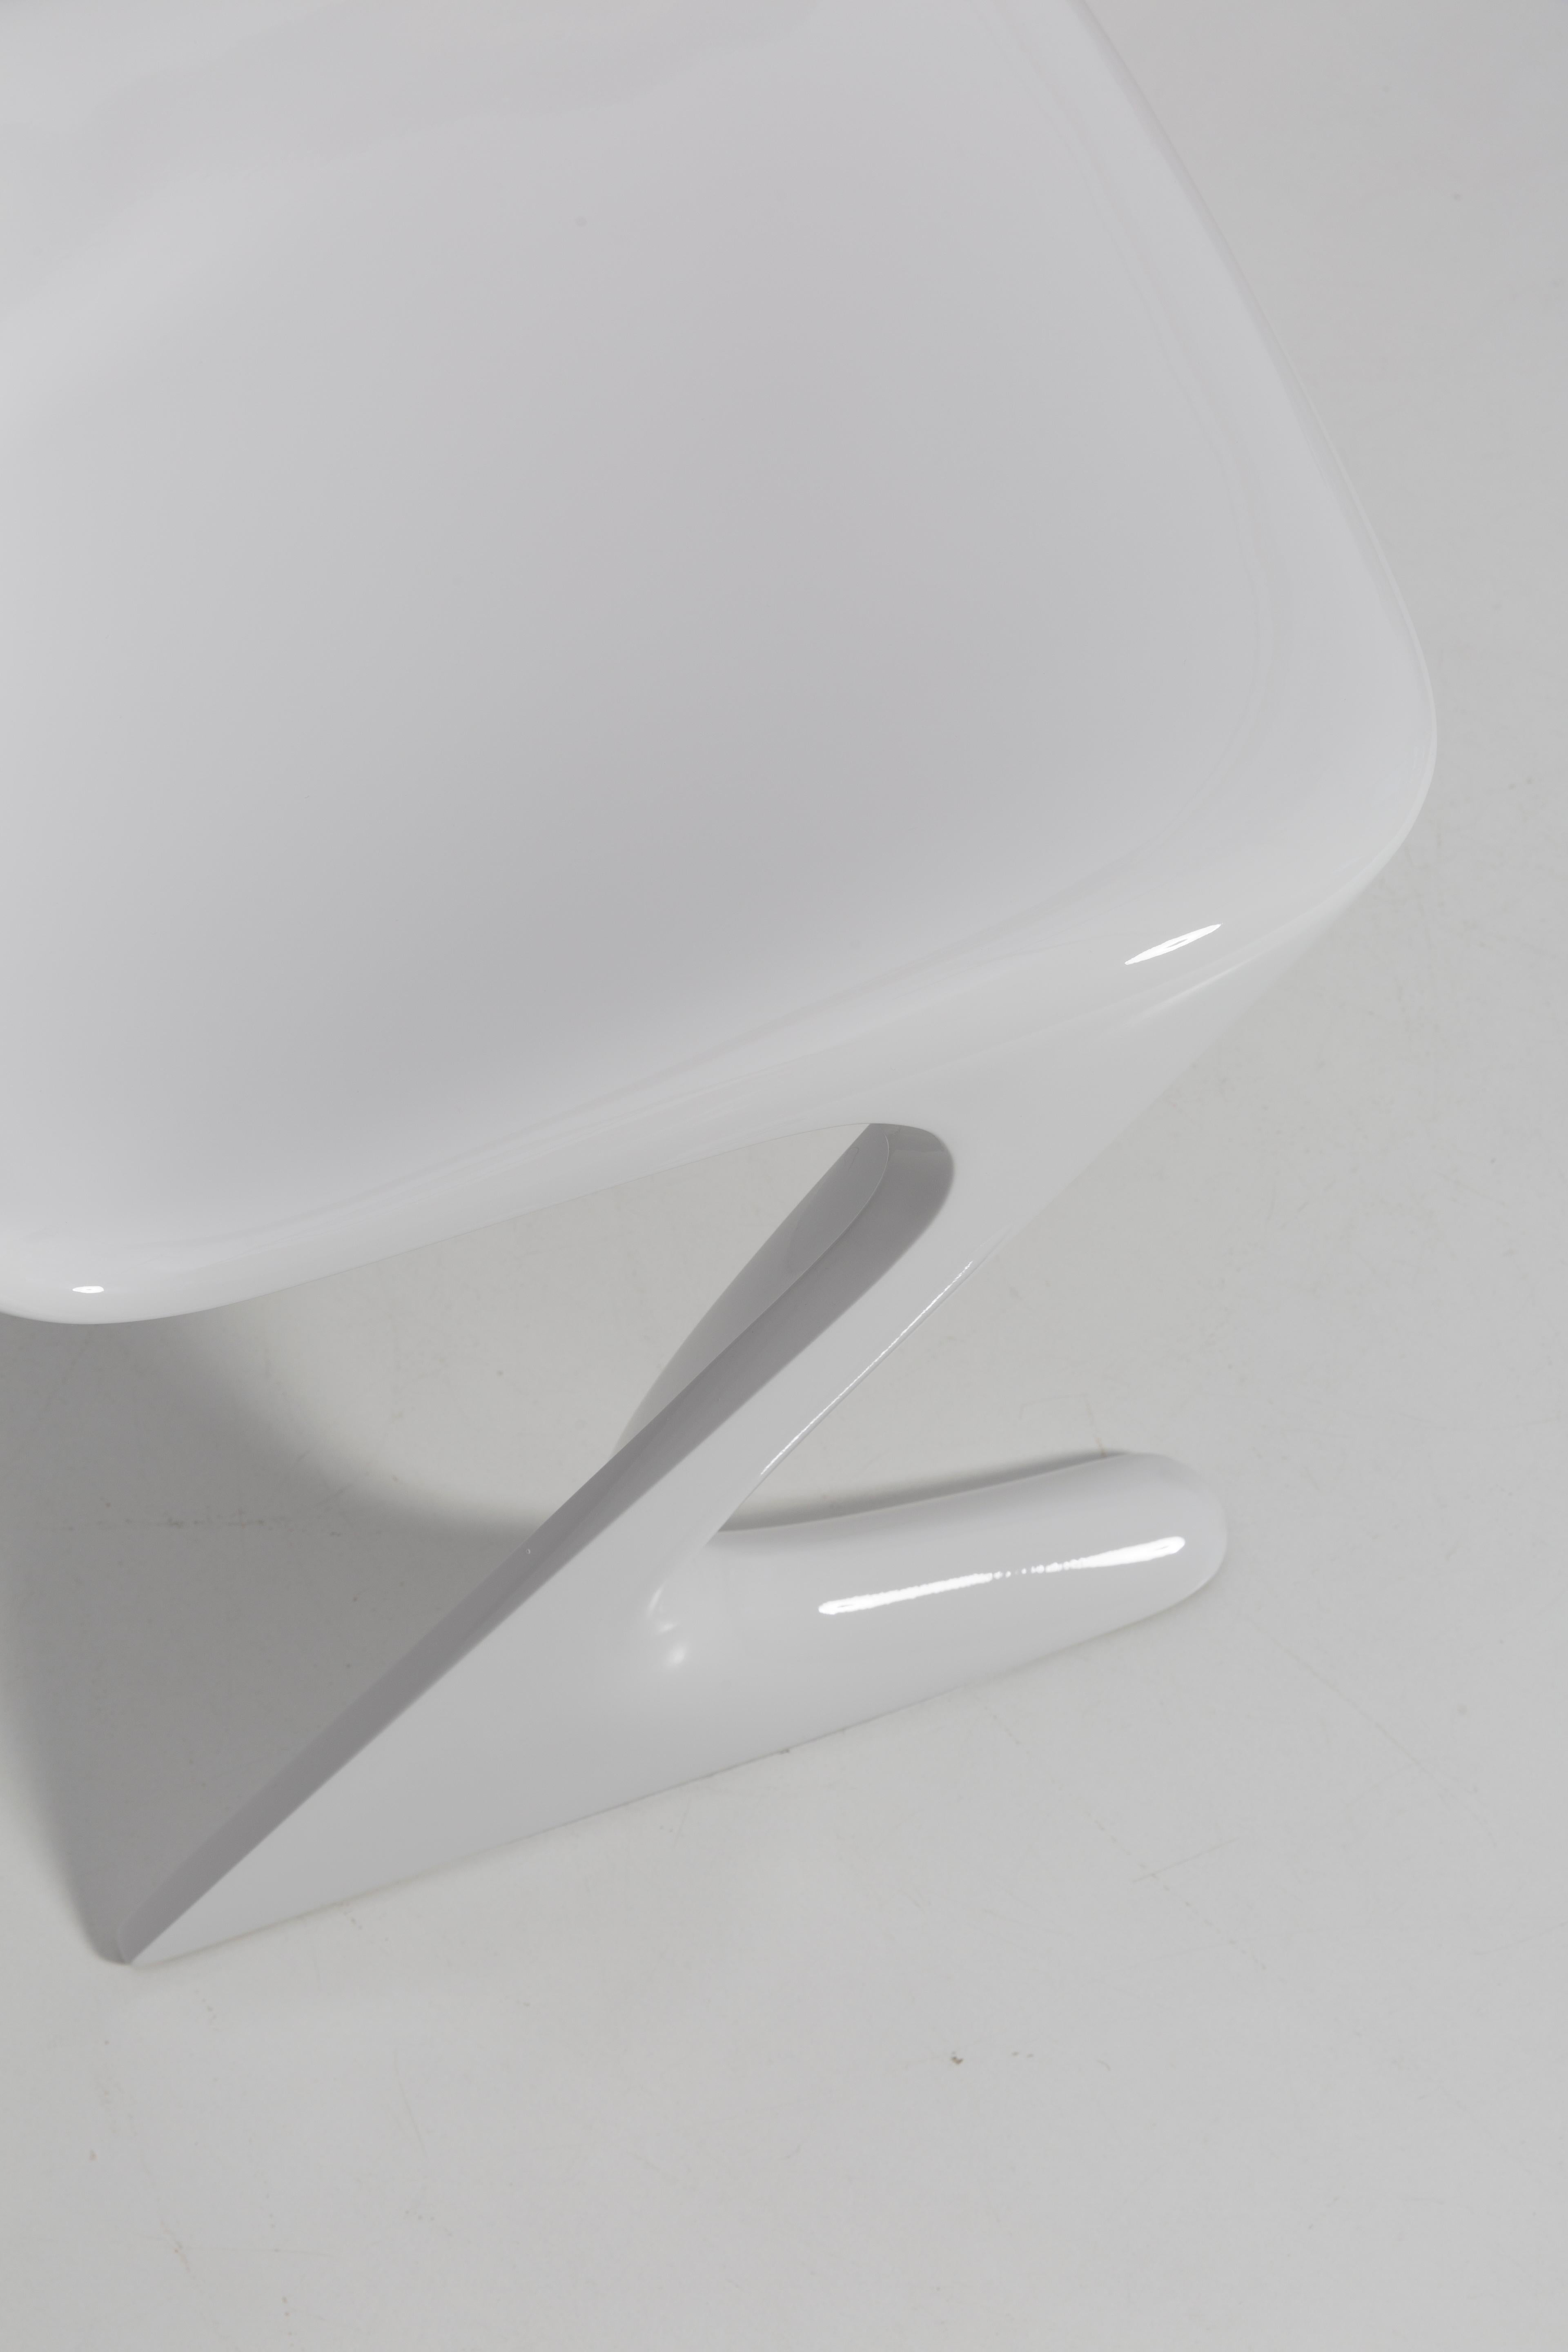 Lacquered White Glossy Kangaroo Chair Designed by Ernst Moeckl, Germany, 1960s For Sale